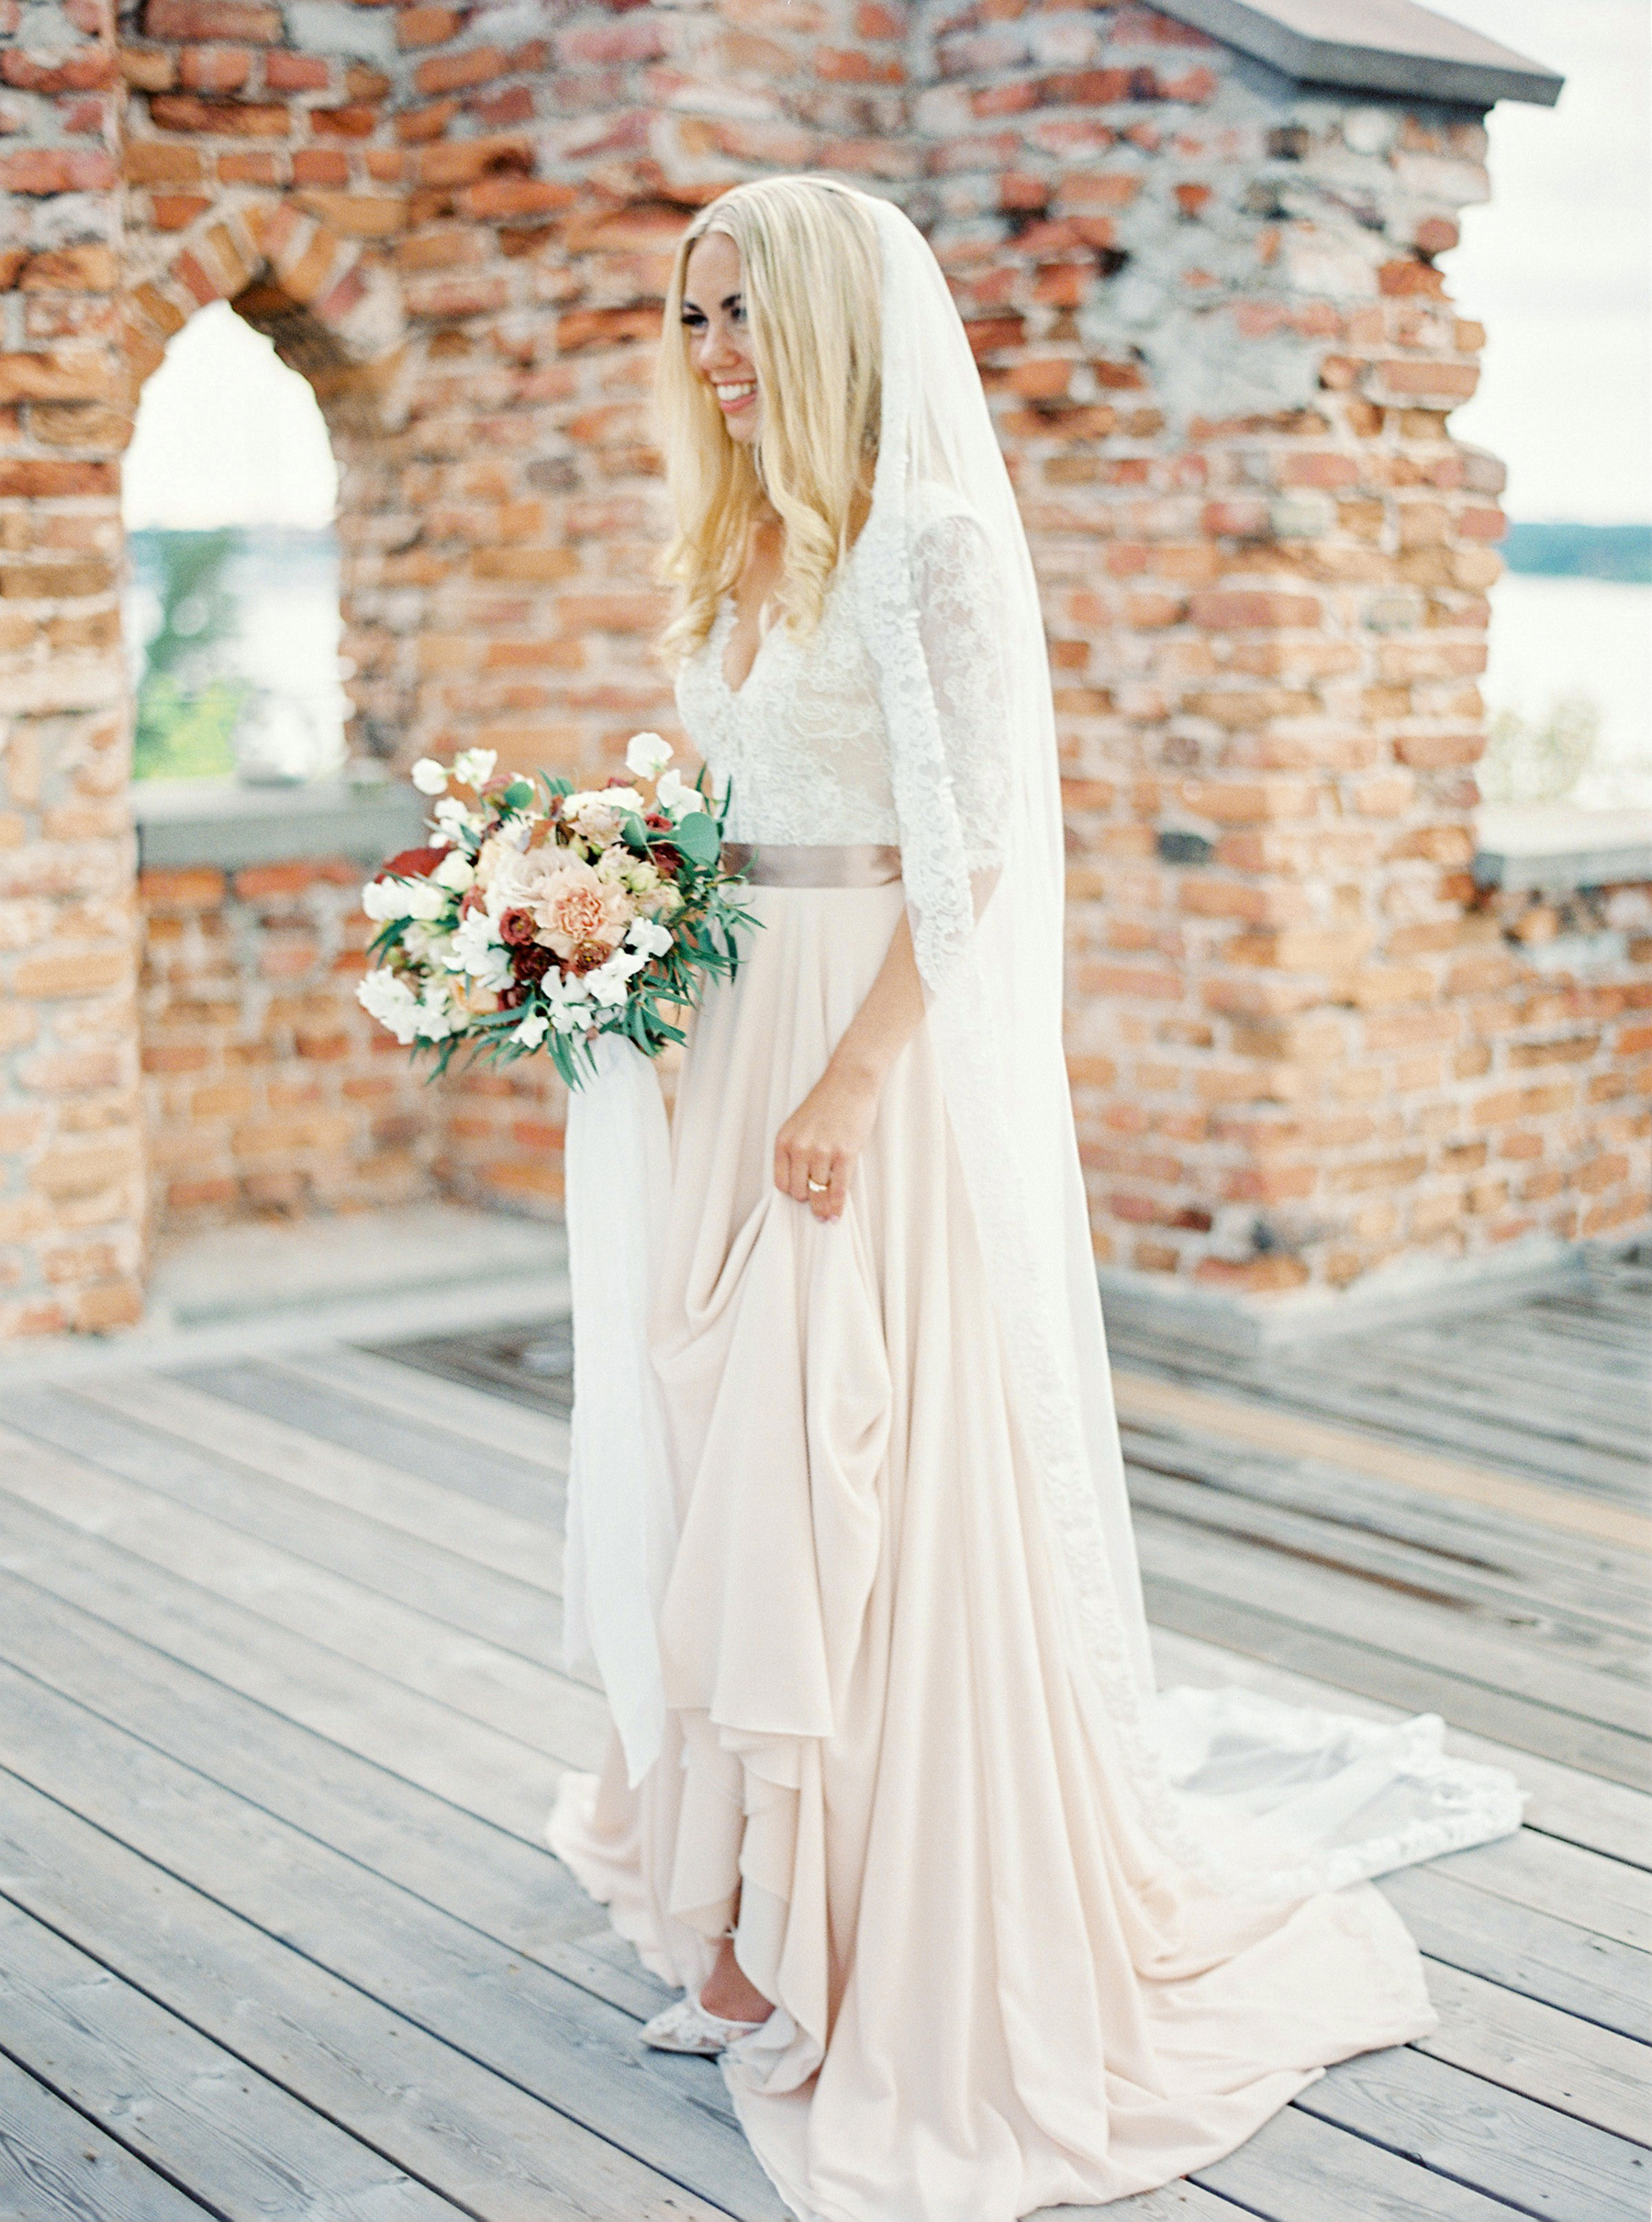 Bright and Warm Colored Wedding Inspiration in Sweden 2 Brides Photography49